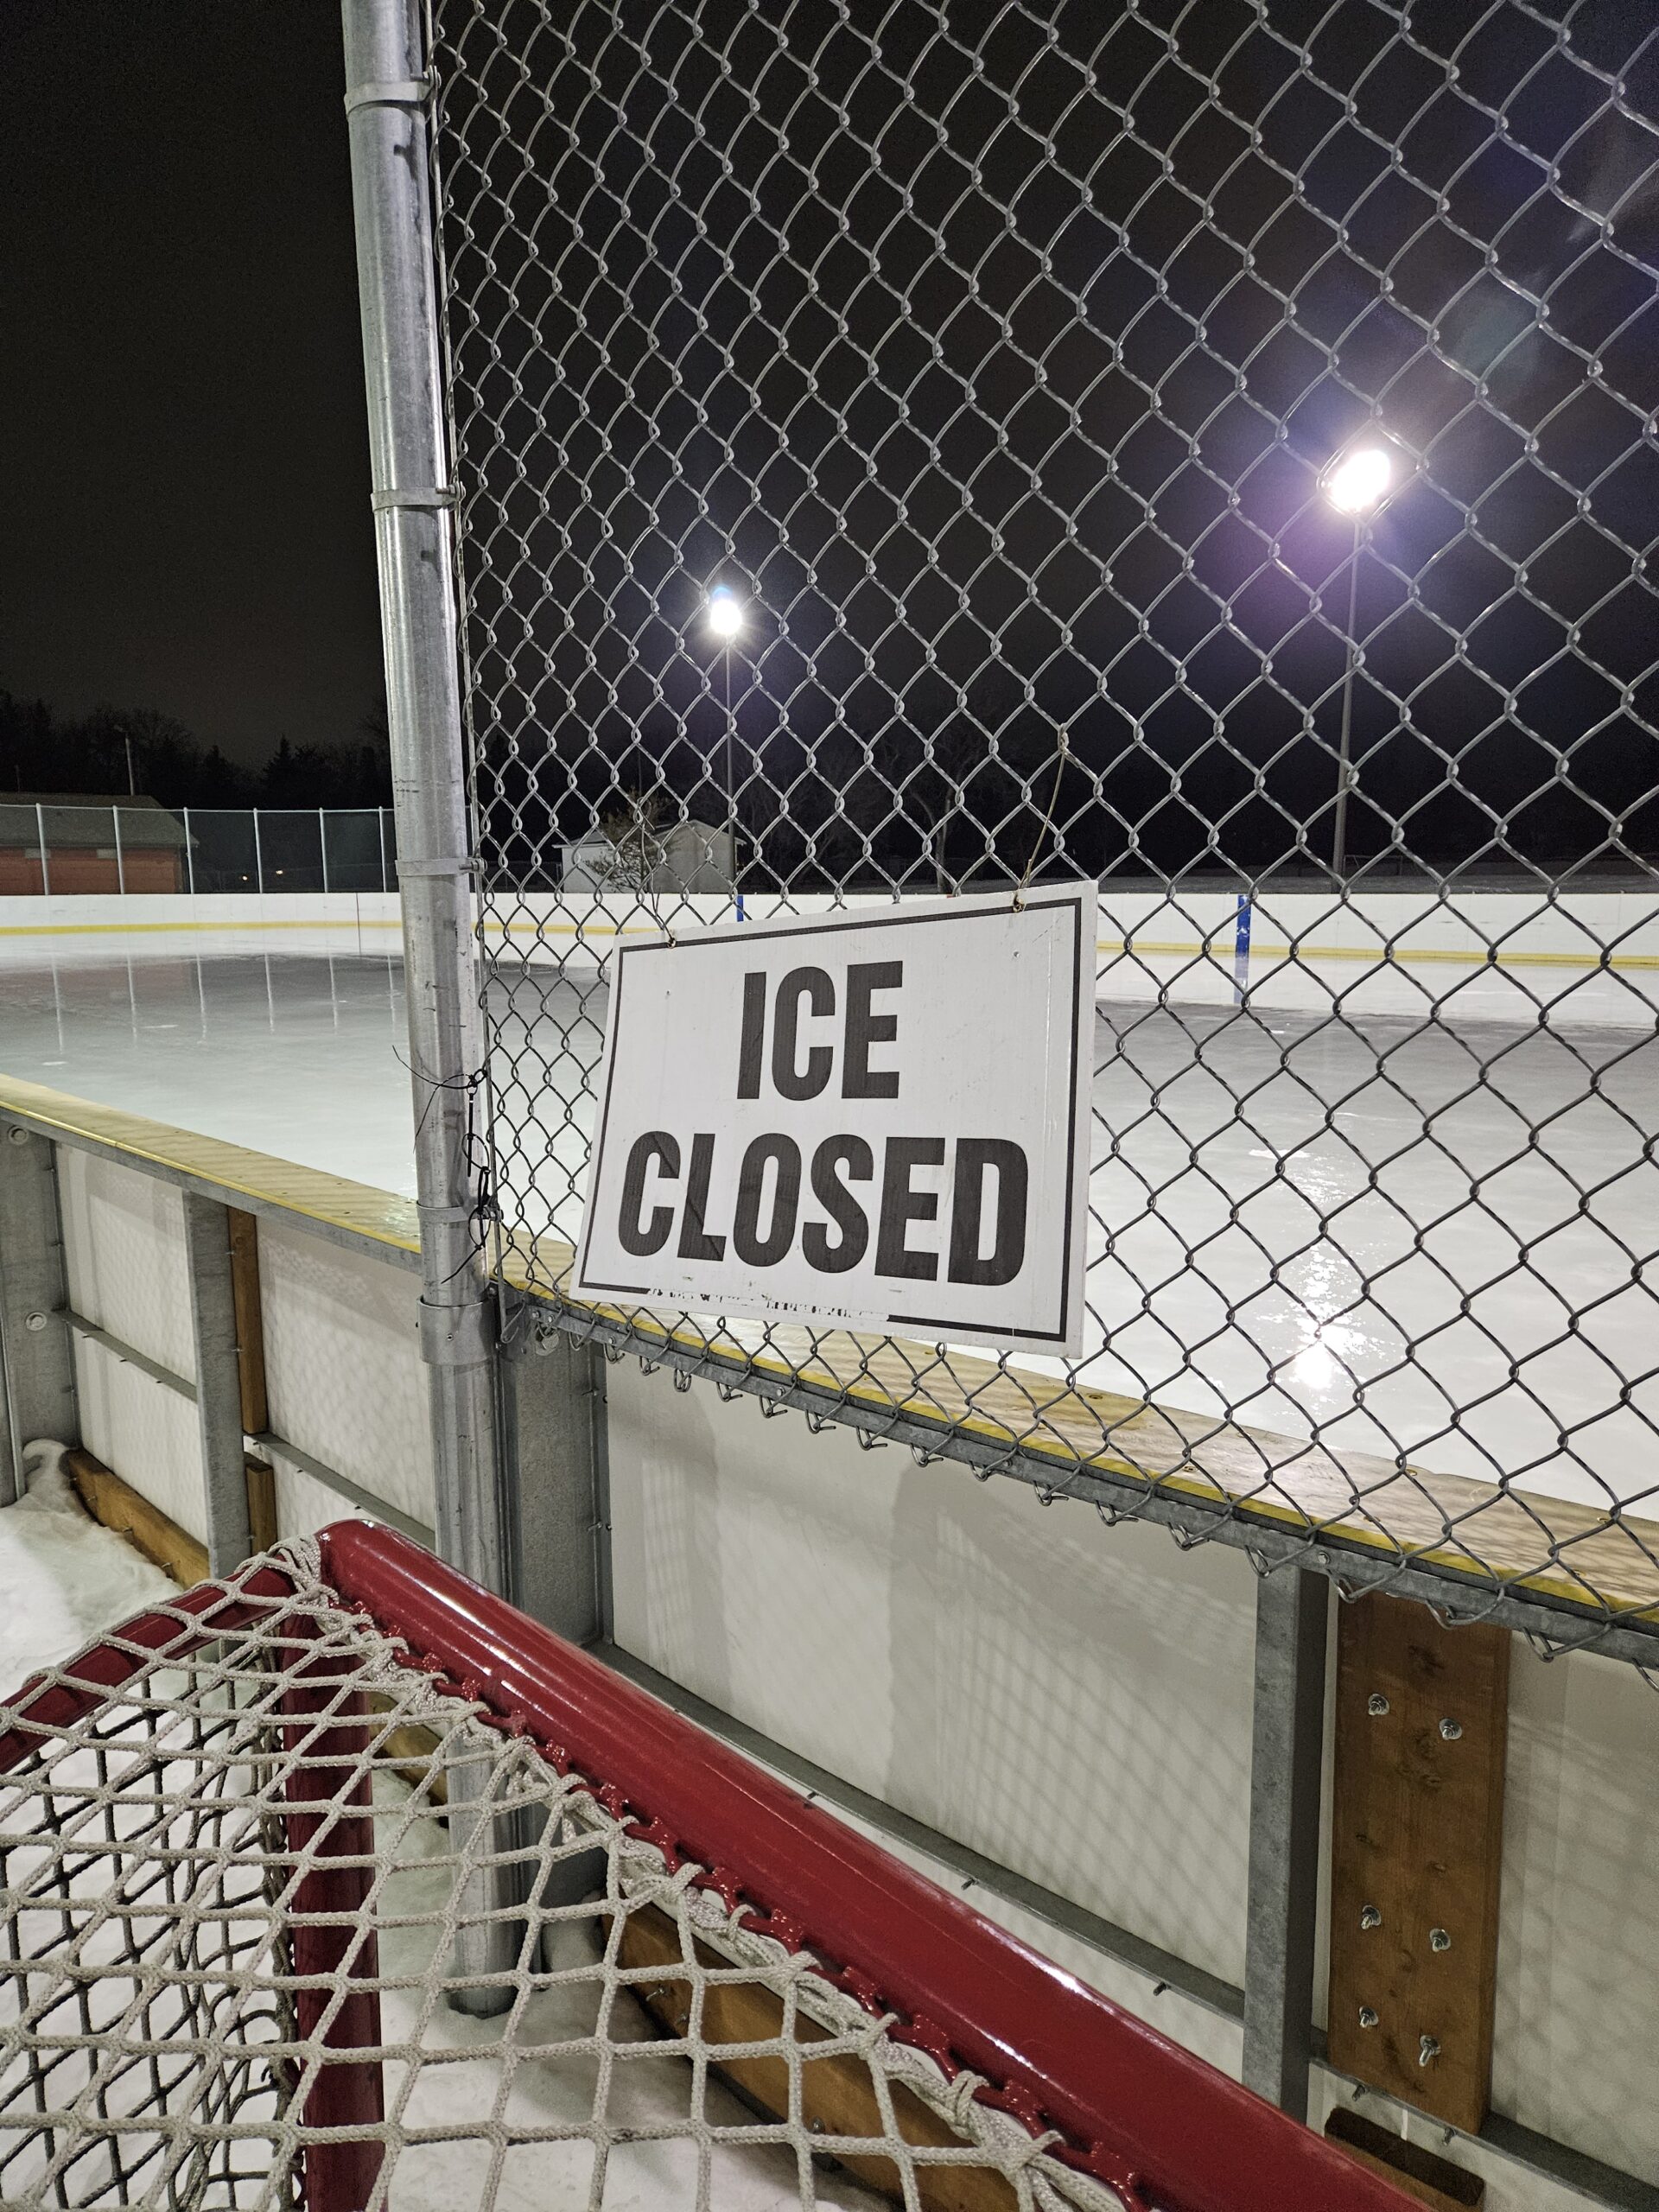 The Bourkevale south hockey rink at night. The rink is enclosed by a chain-link fence, and part of a hockey goal net is visible in the foreground, leaning against the fence. There is a sign attached to the fence that reads "ICE CLOSED", indicating that the rink is not currently open for skating. Bright lights illuminate the scene, likely from light poles positioned around the rink. The ice surface appears smooth and unoccupied, and there is some snow piled against the fence.